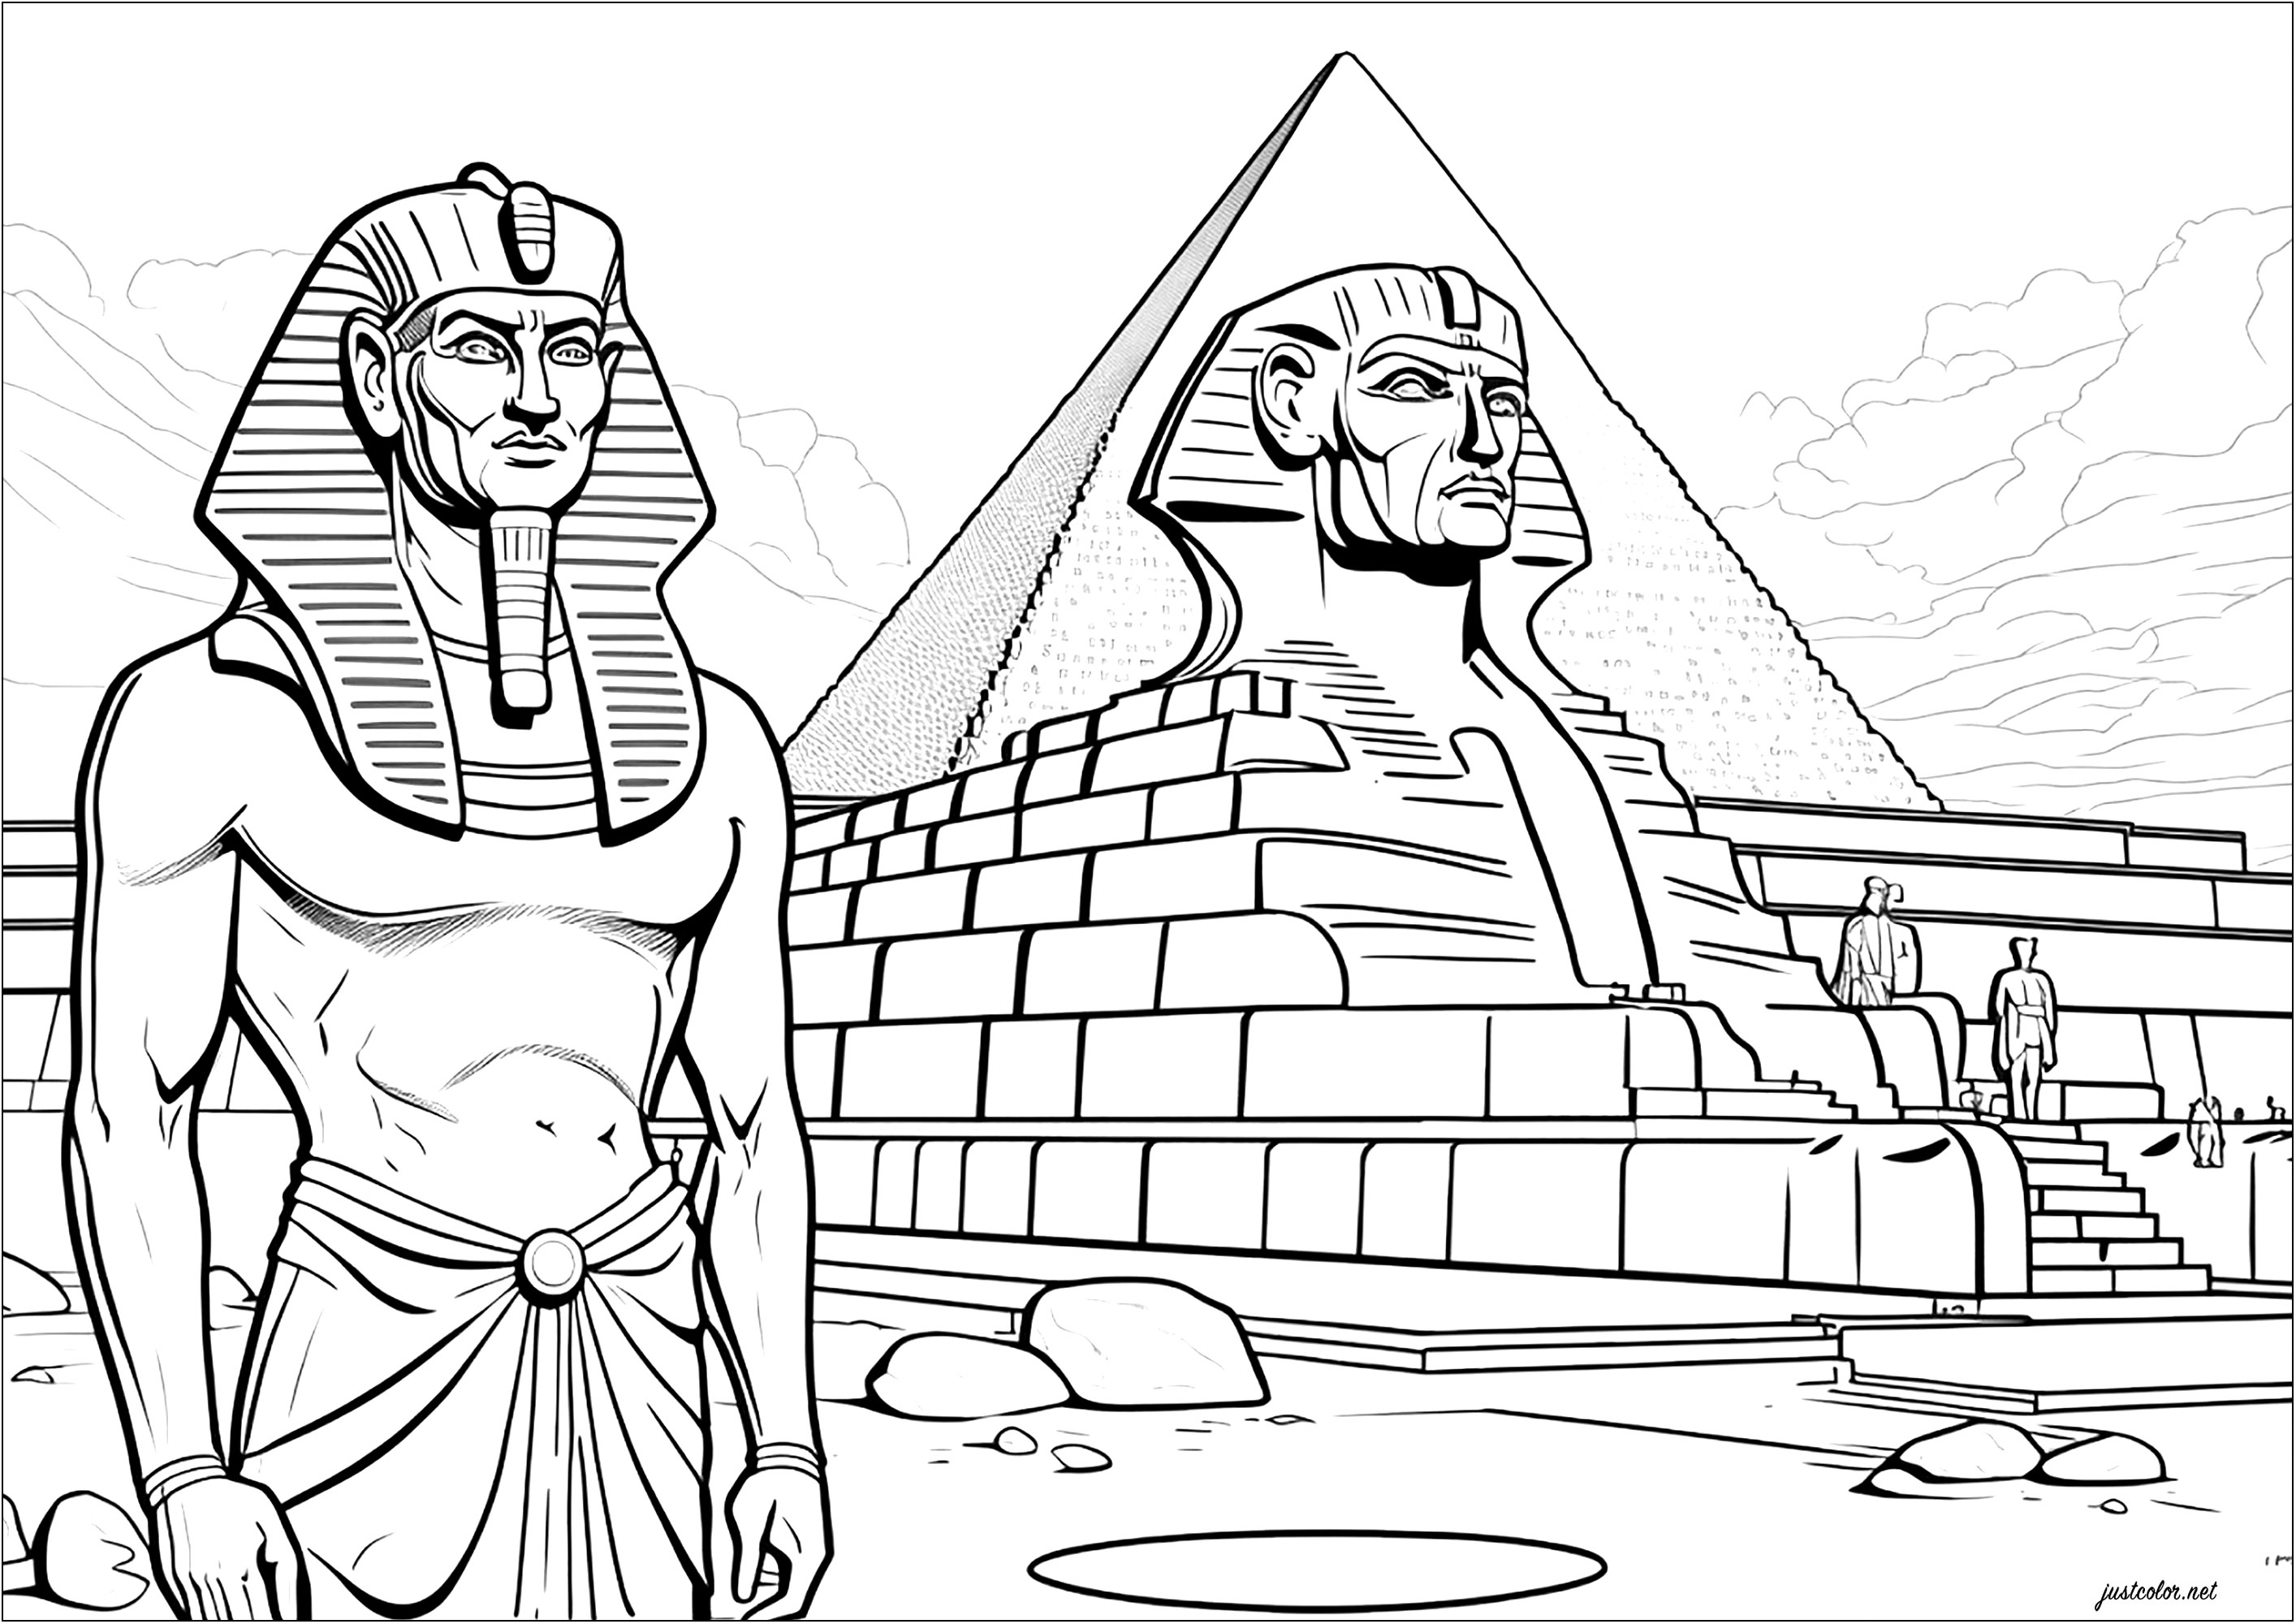 Pharaoh in front of his sphynx and pyramid. This coloring page depicts a pharaoh standing before a sphynx representing him and a great pyramid. It's a magnificent representation of ancient Egypt and its grandeur.